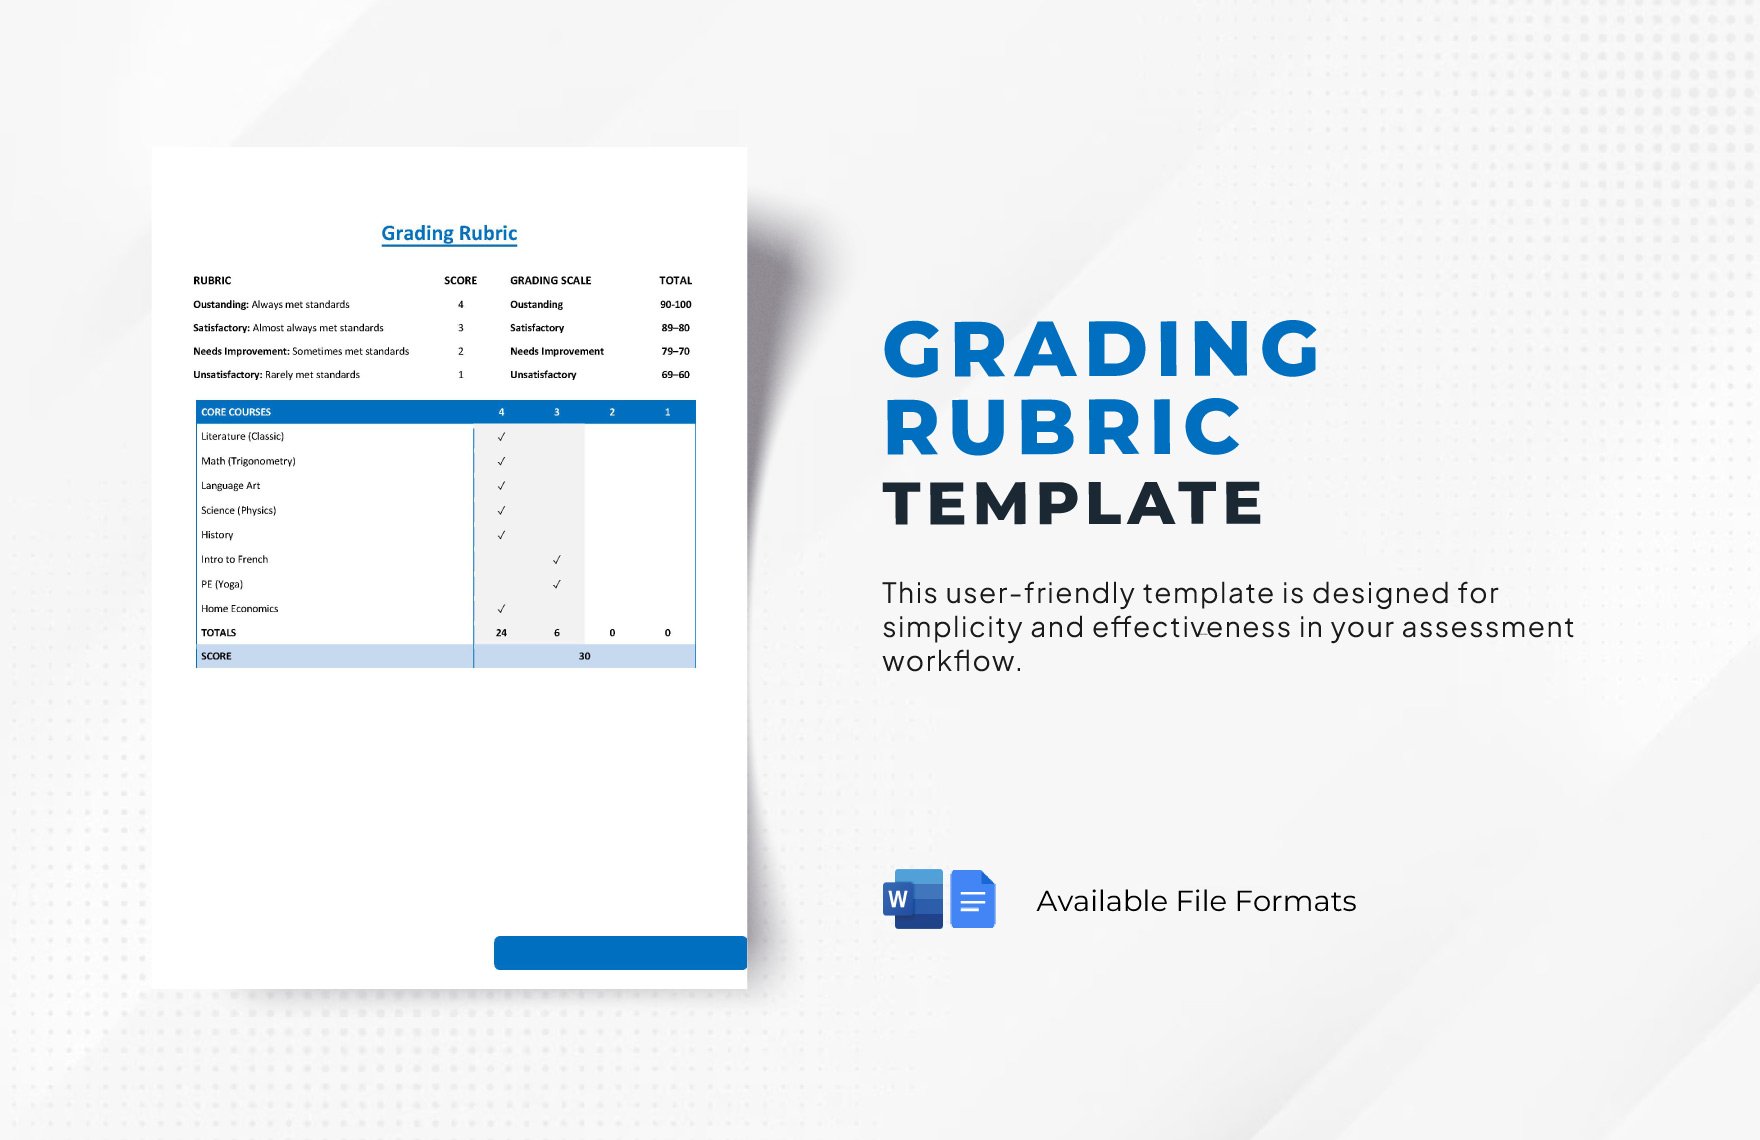 Free Grading Rubric Template in Word, Google Docs